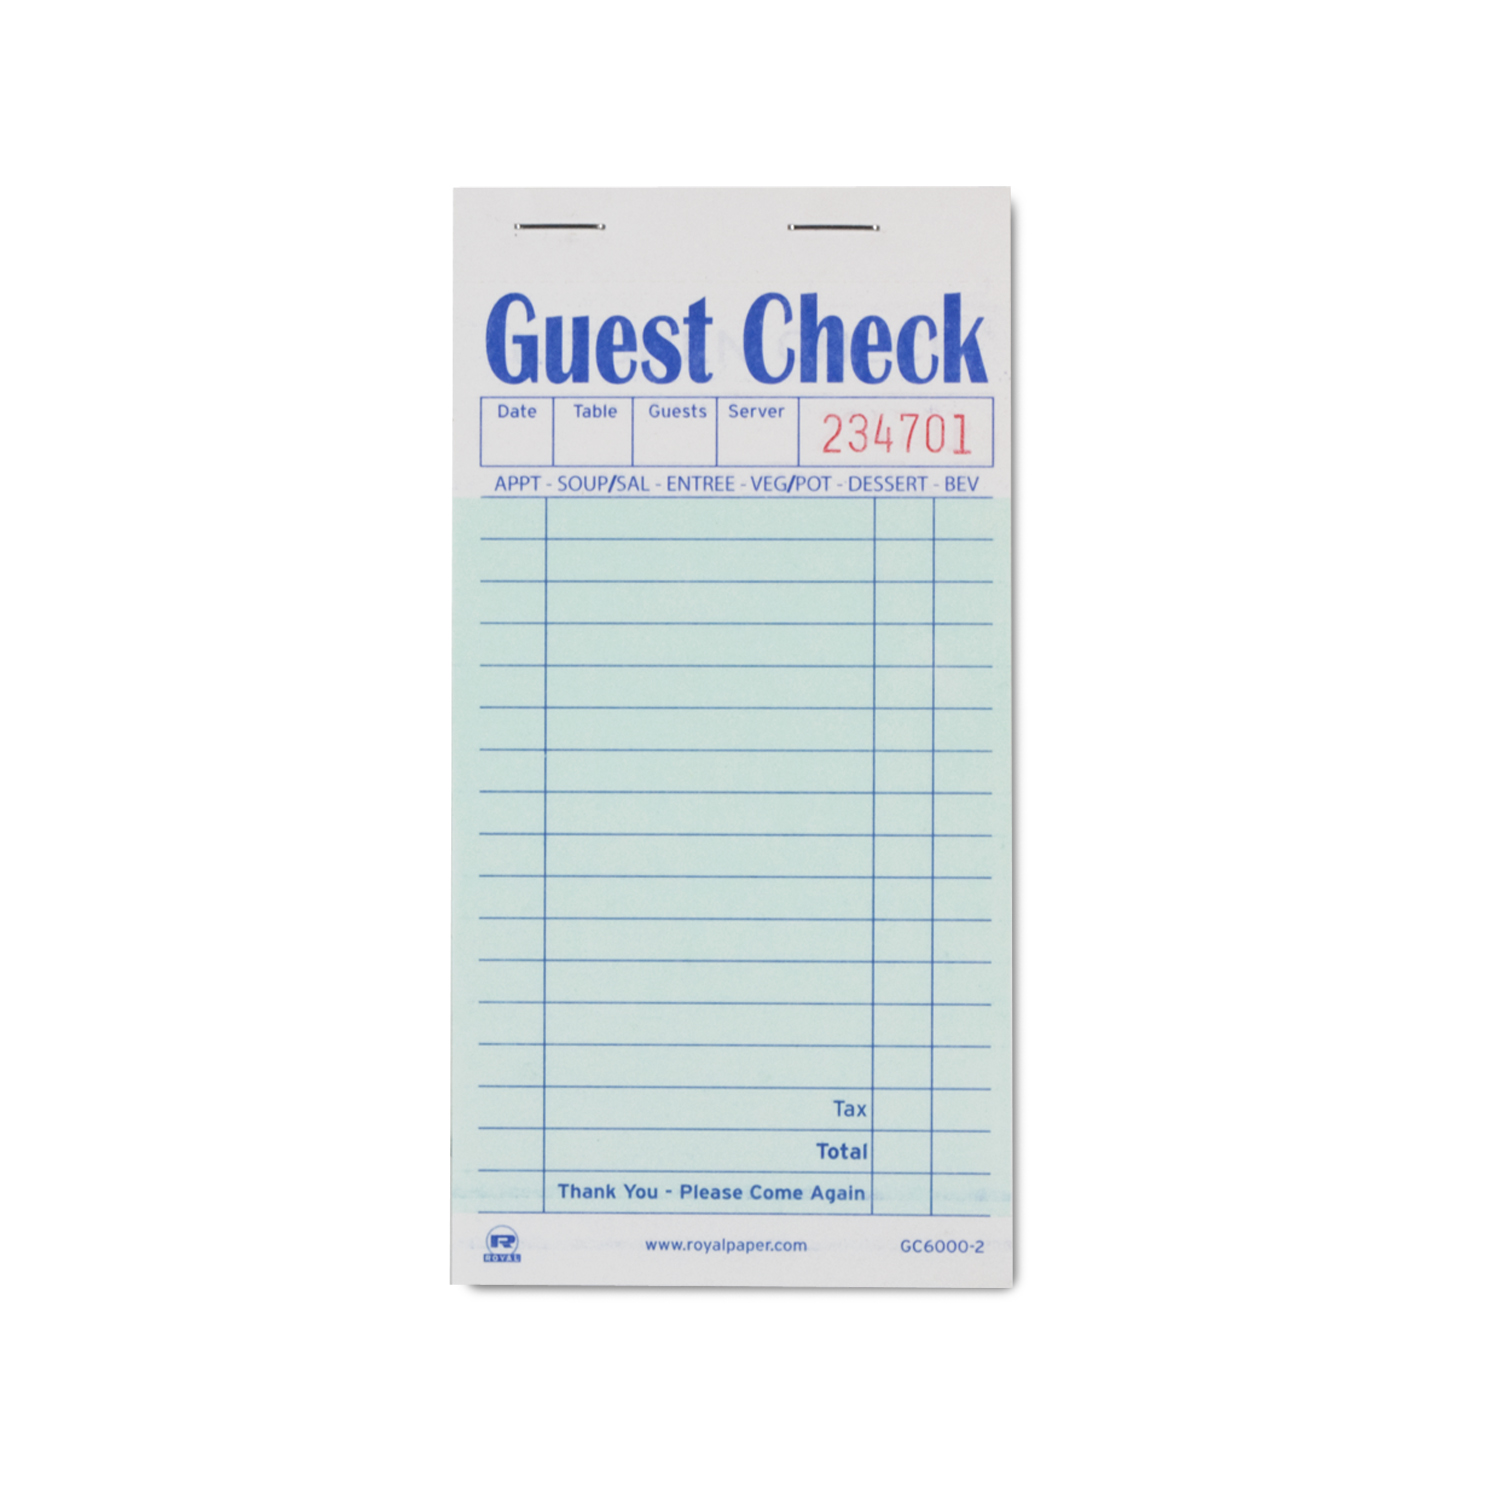 GUEST CHECK DUPLICATE WITH CARBON